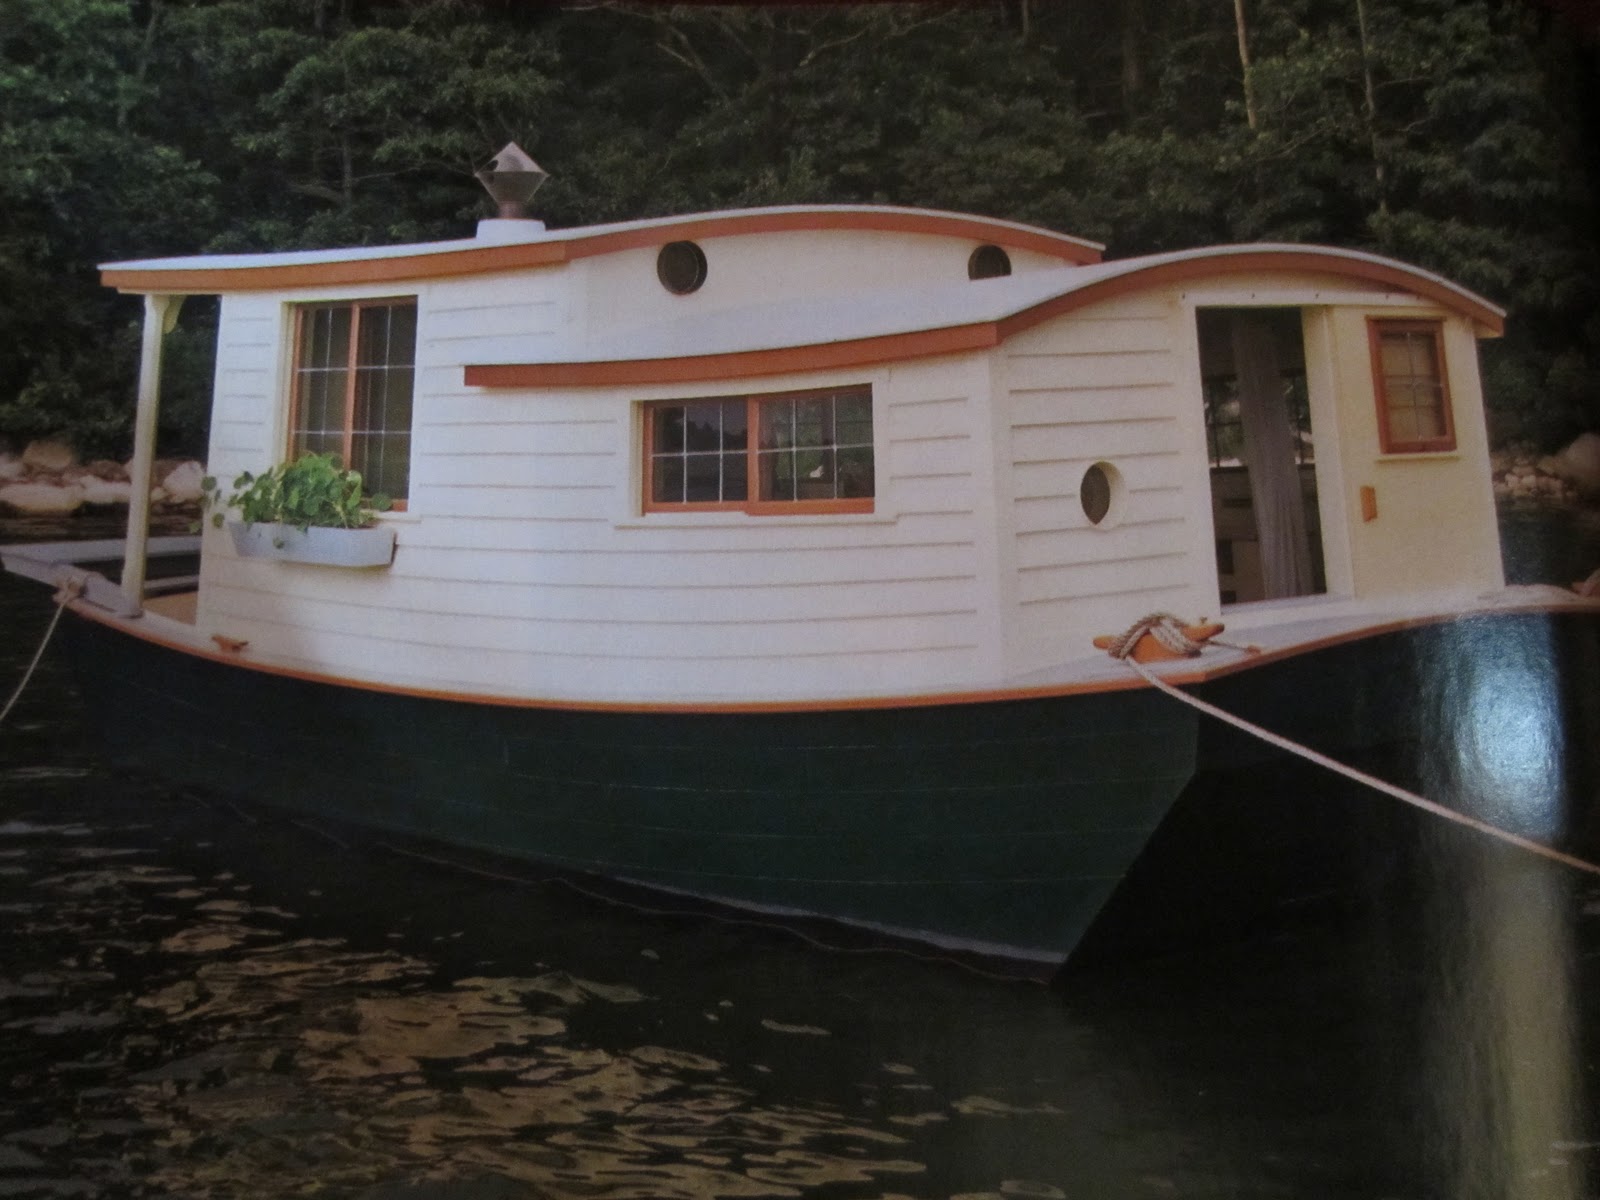 On Tues: Chapter Shanty boat plans free